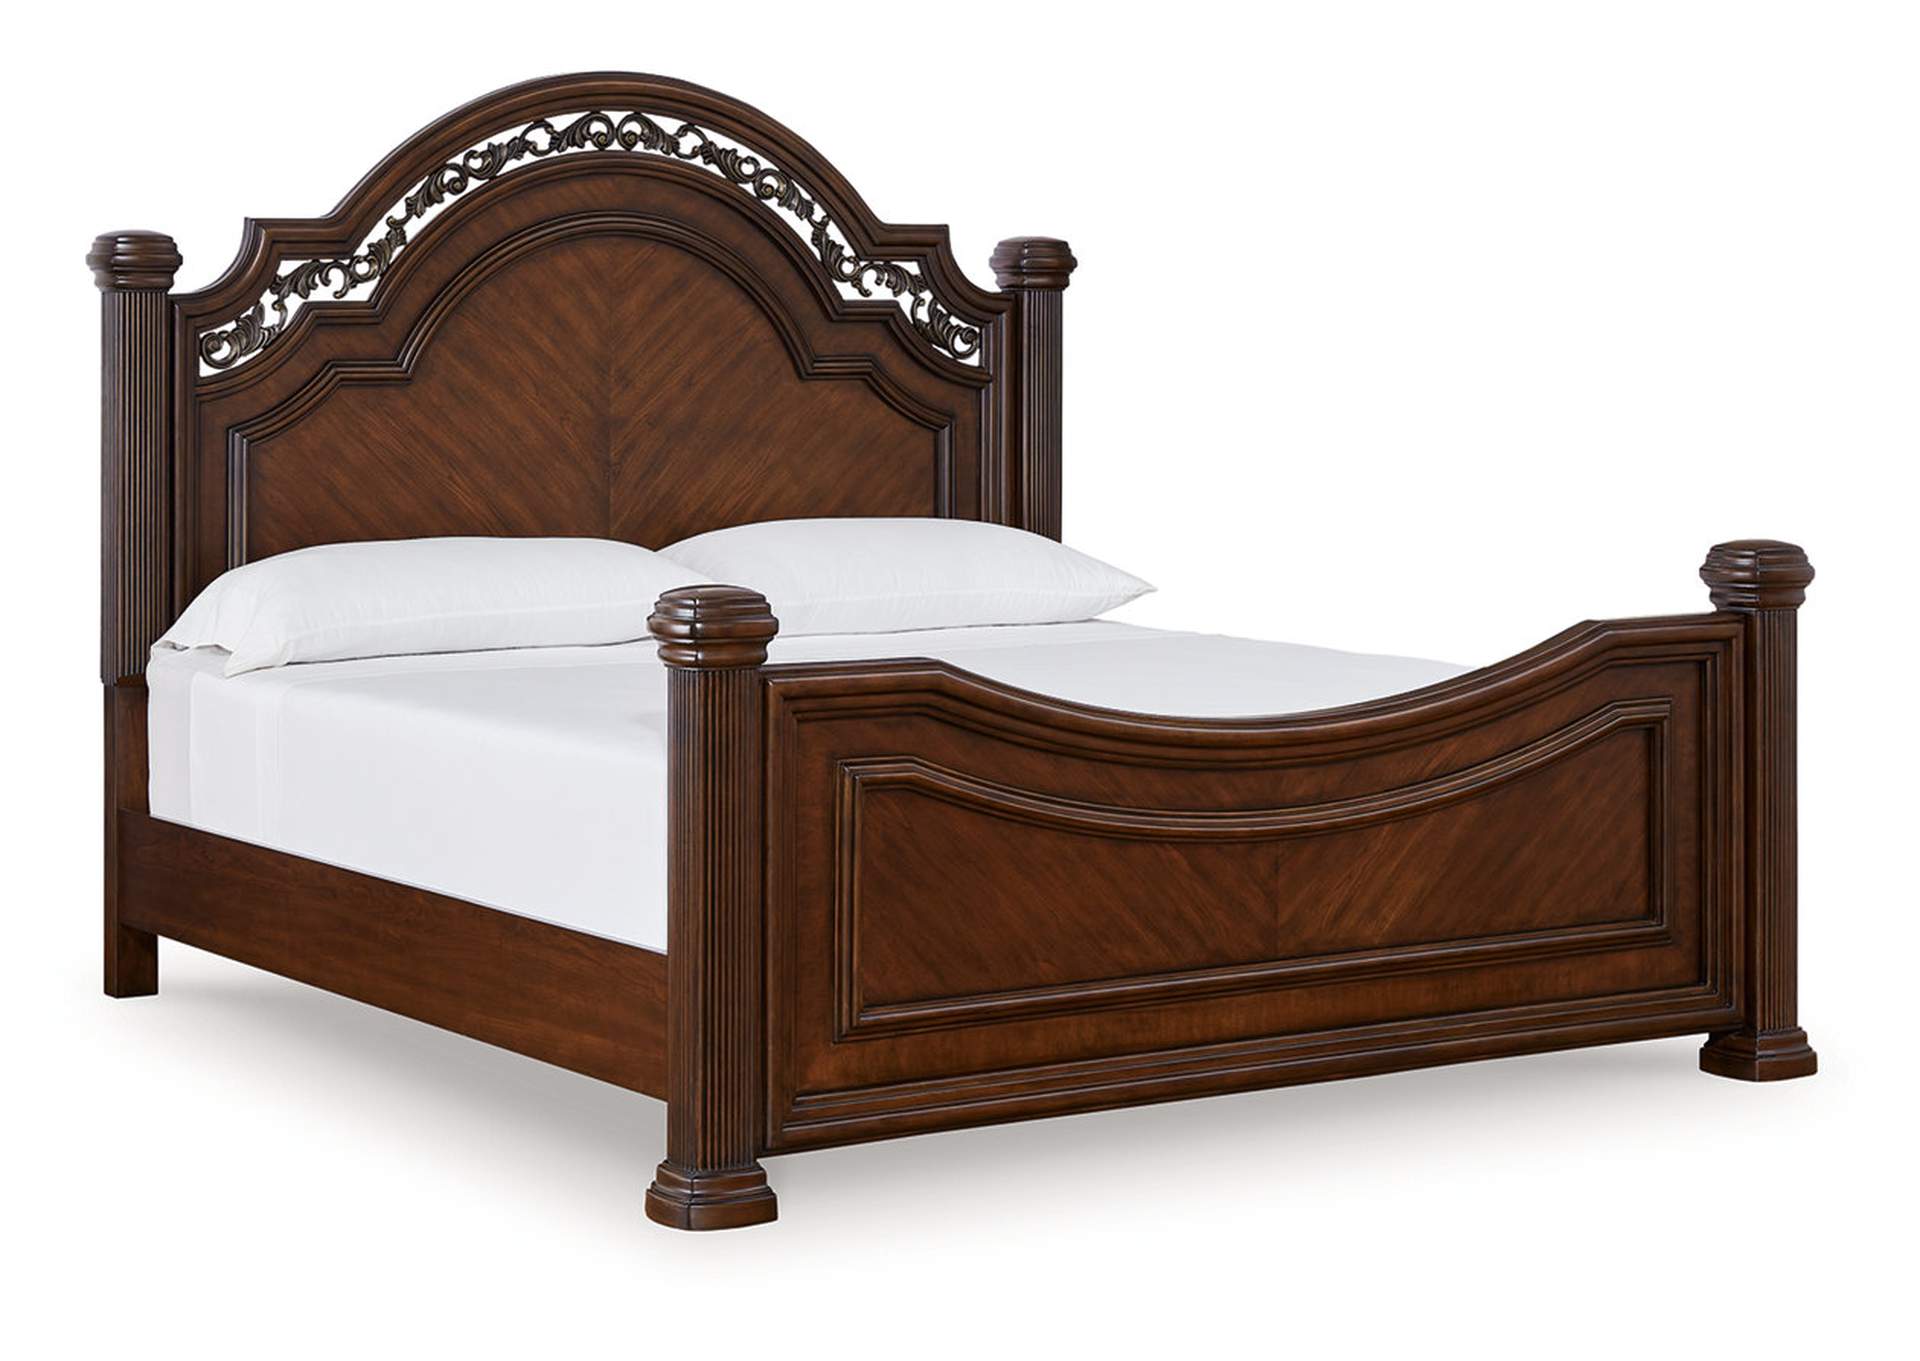 Lavinton King Poster Bed,Signature Design By Ashley